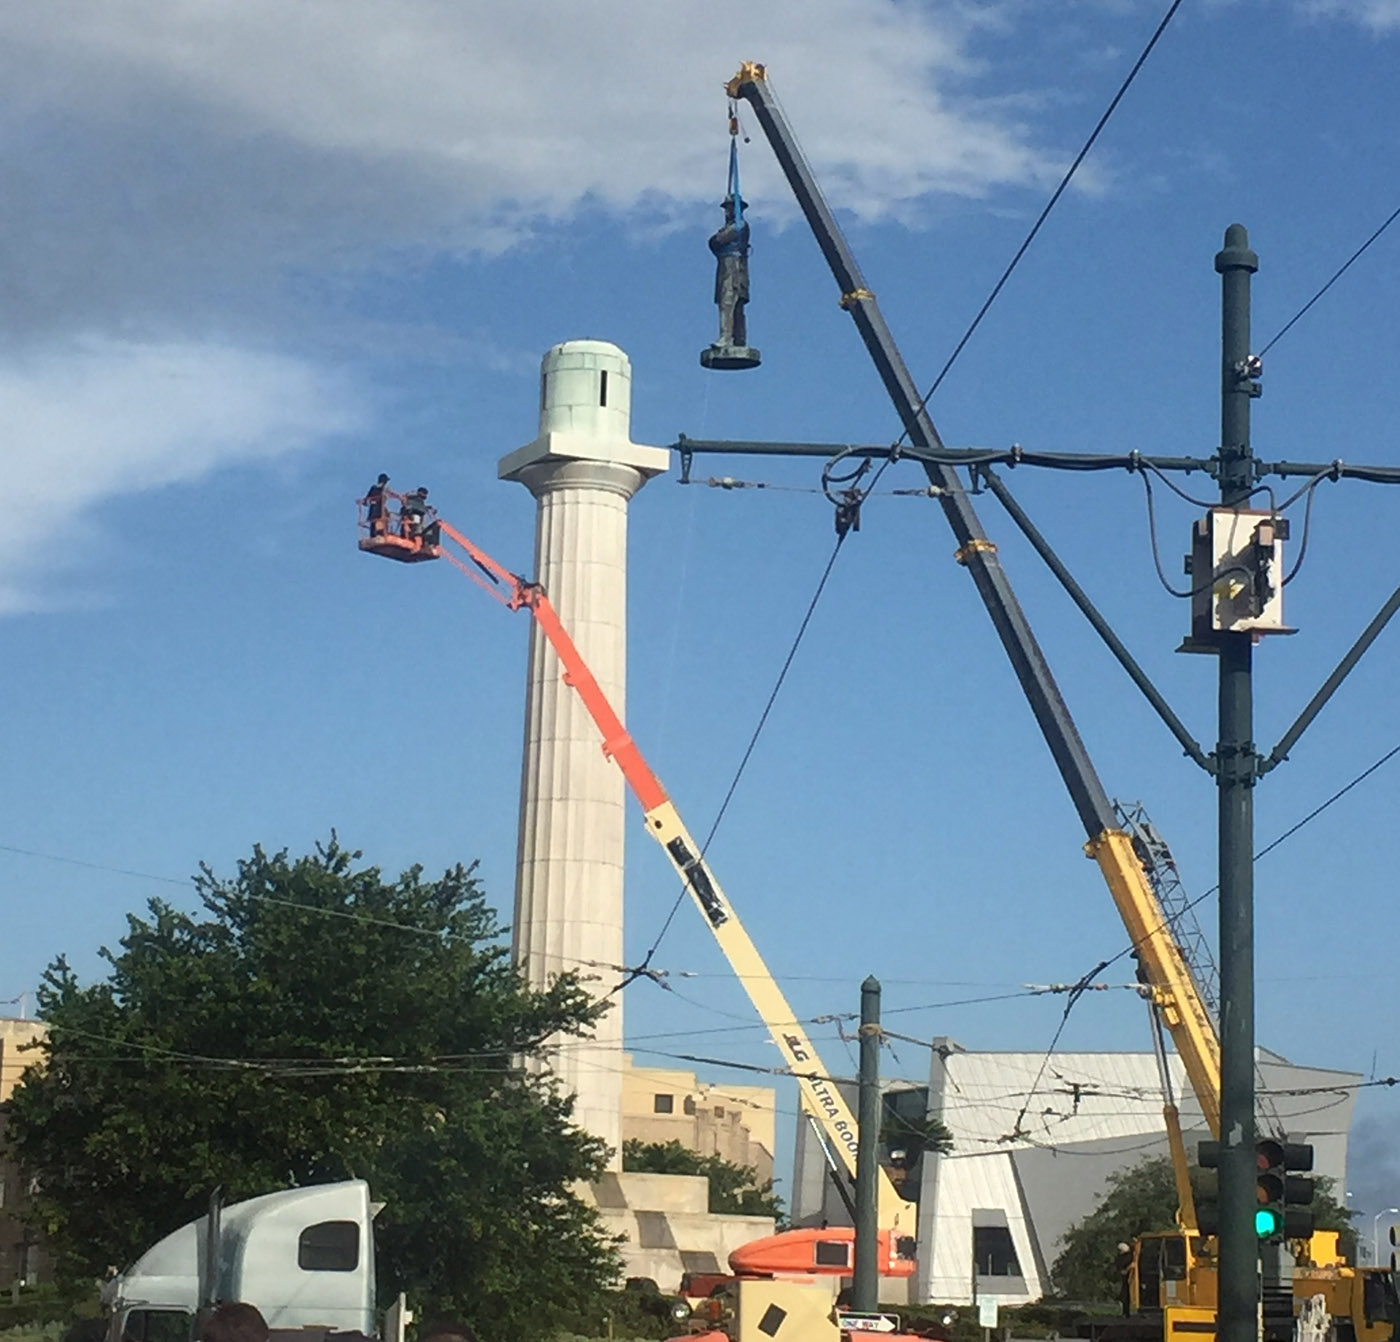 Removal of the Robert E. Lee Statue